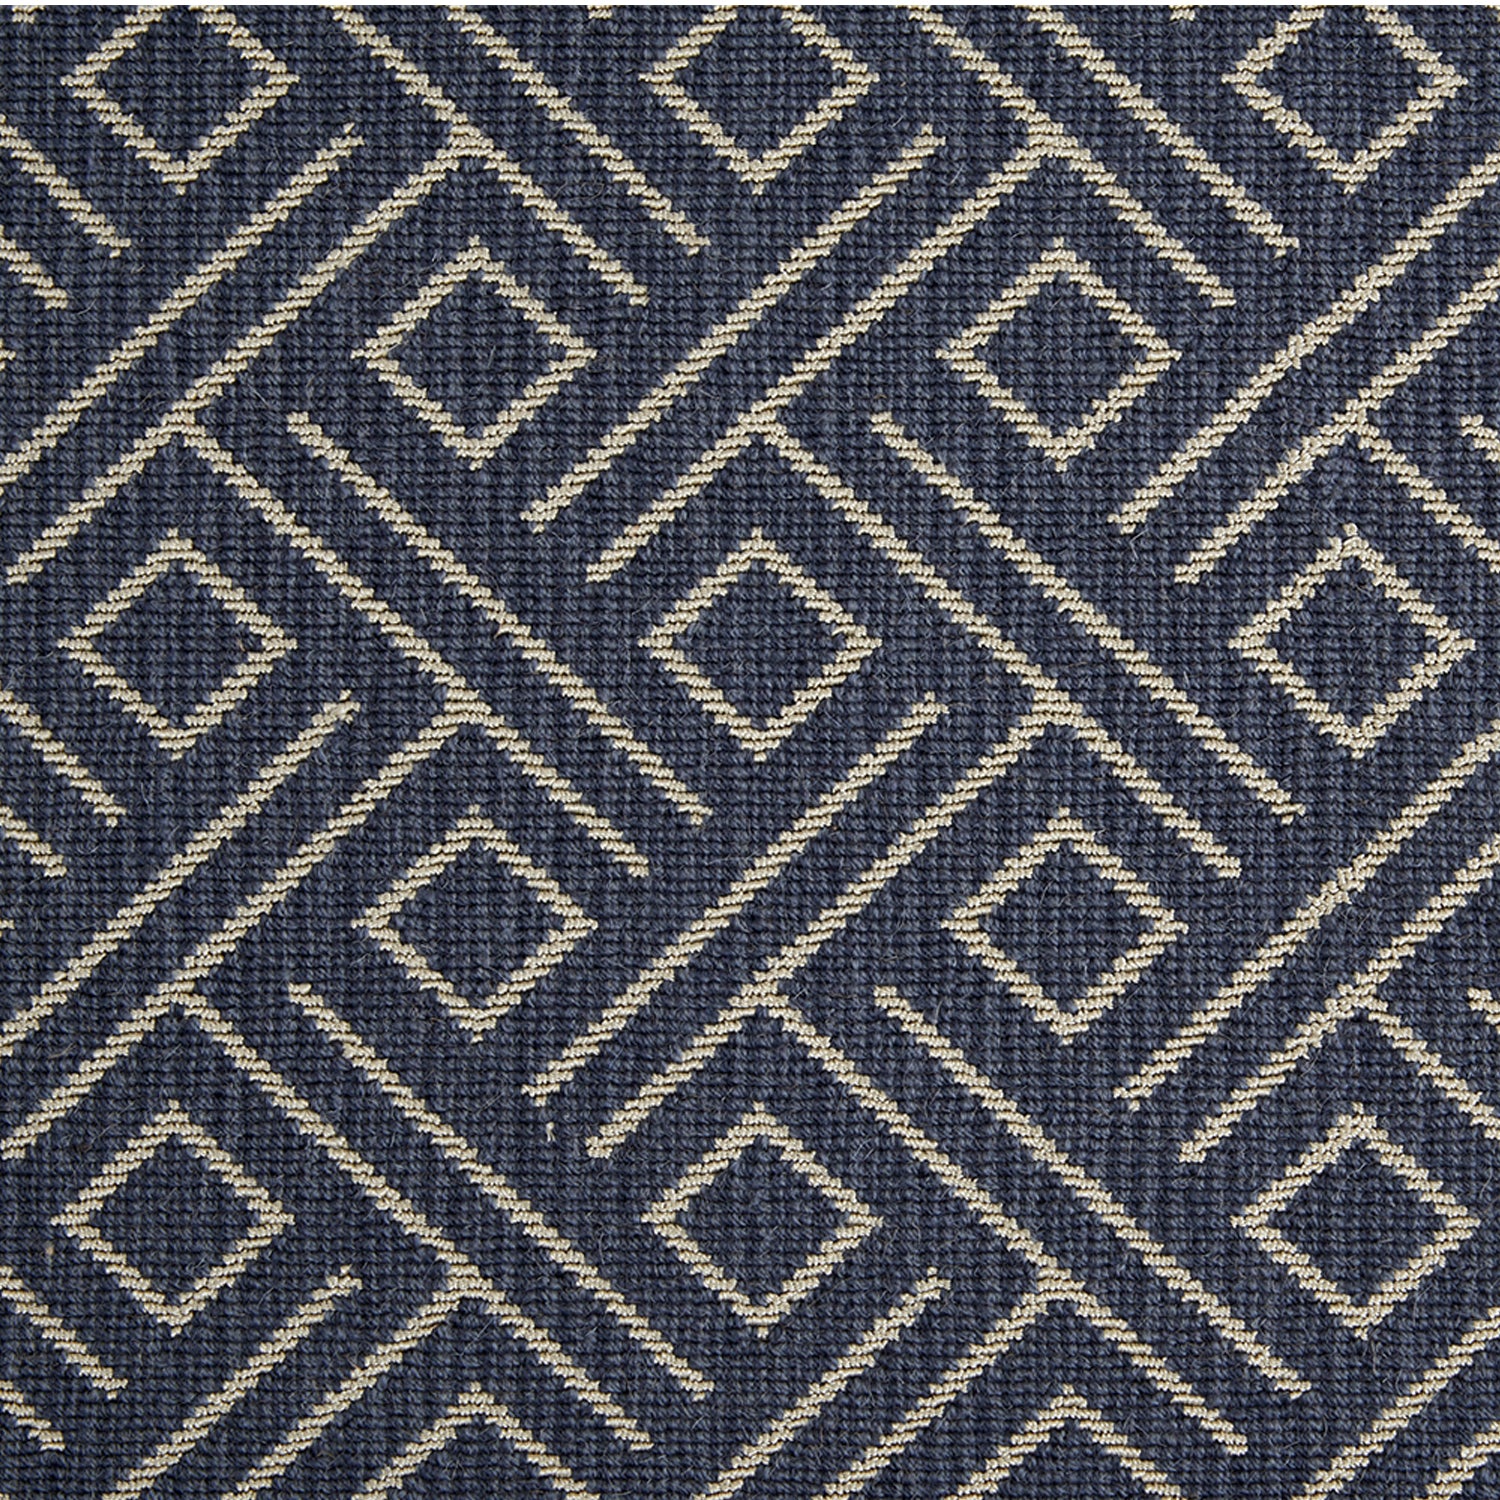 Wool-blend broadloom carpet swatch in a geometric line and square pattern in tan on a navy field.